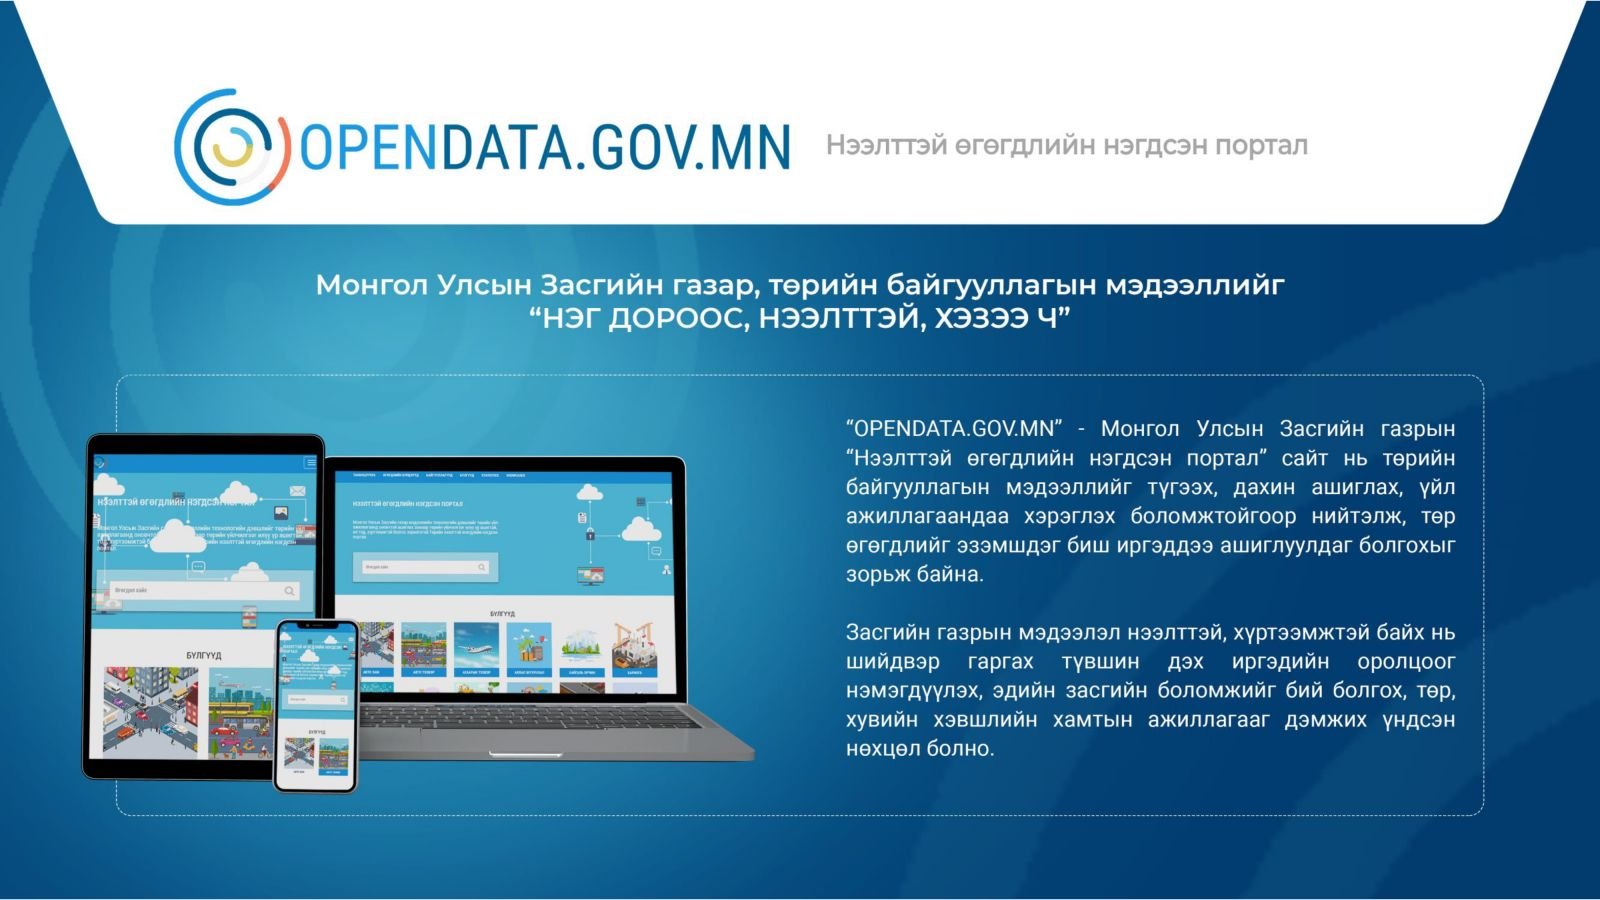 Open data portal was launched